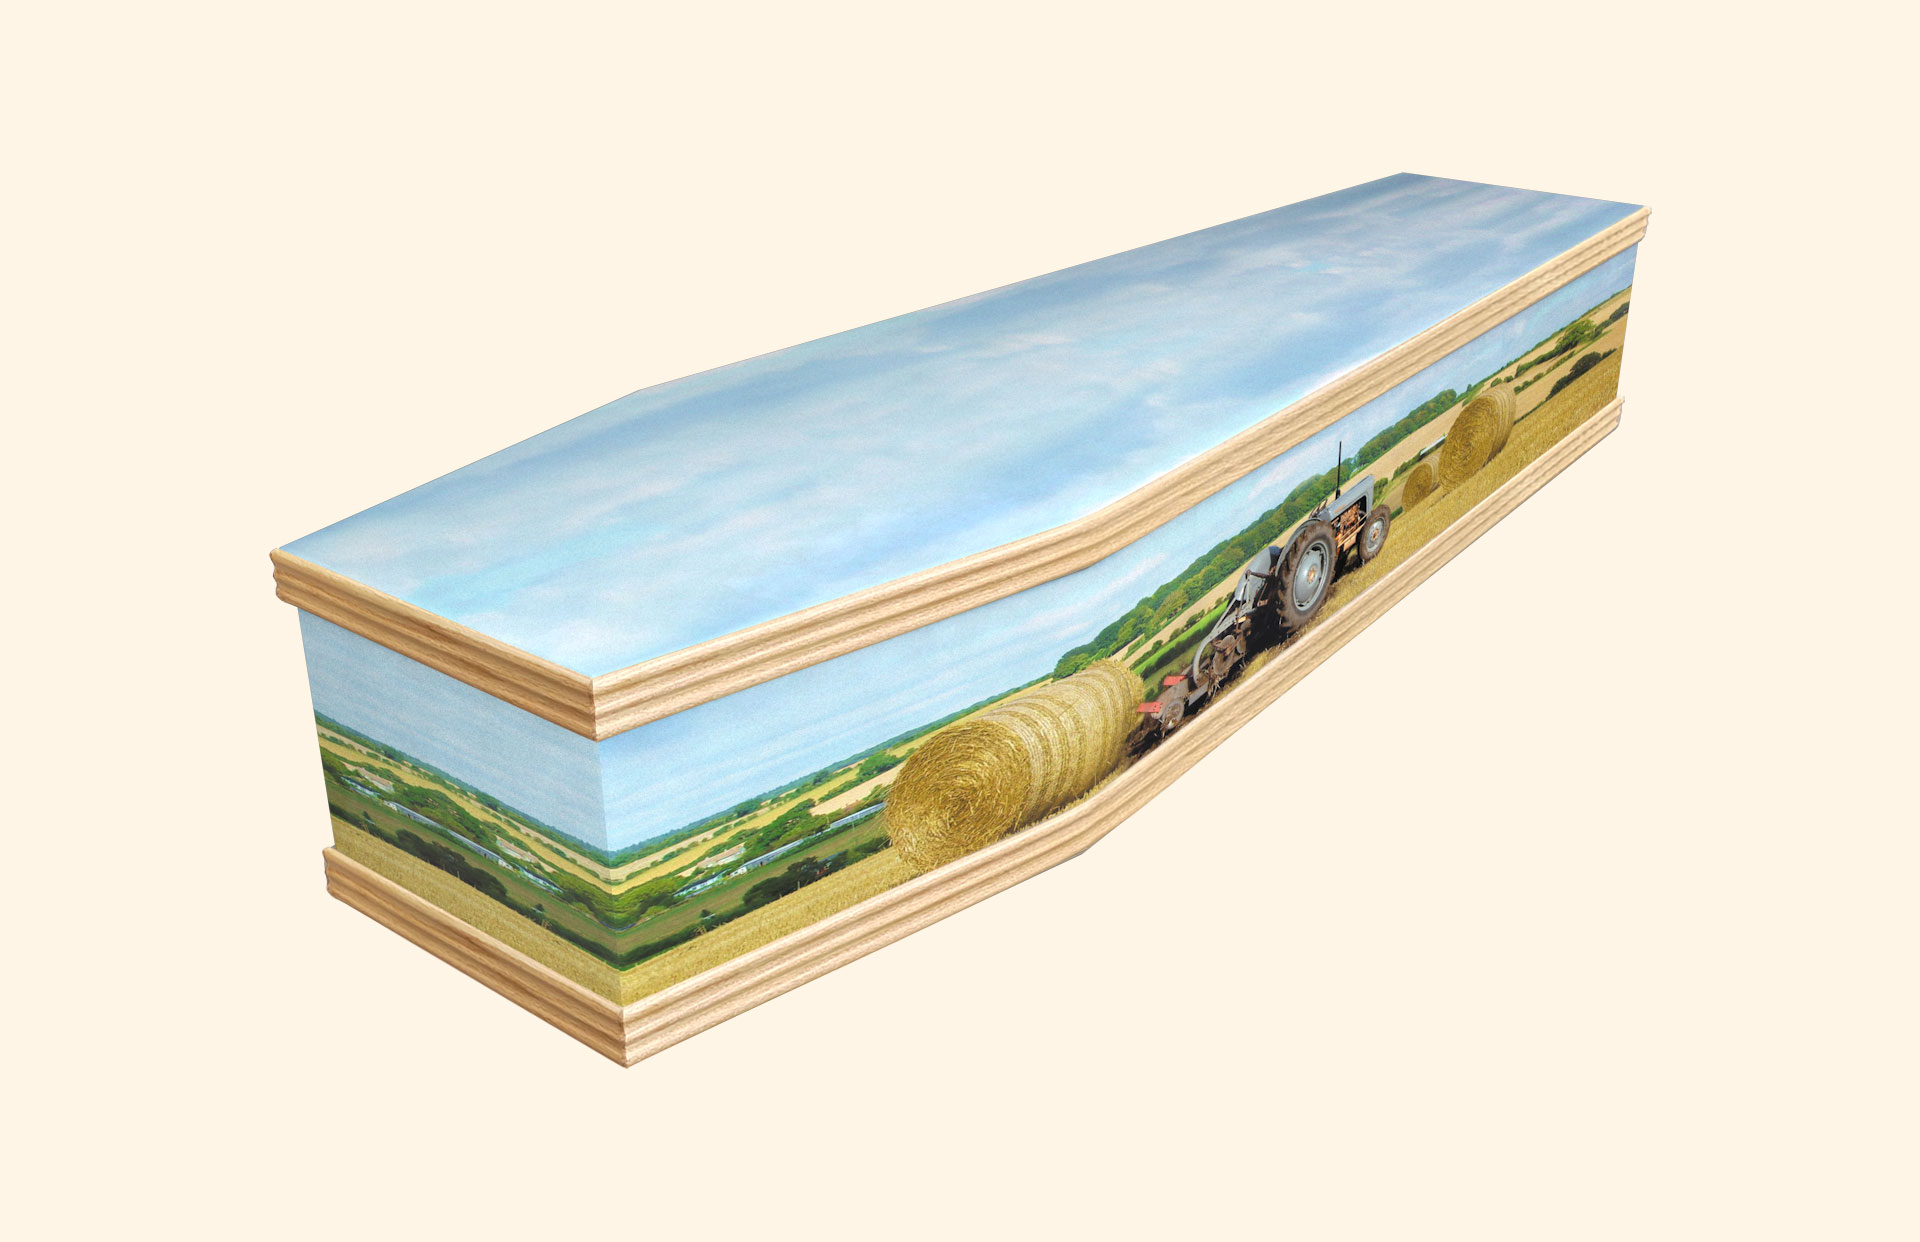 Hayfield design on a classic coffin